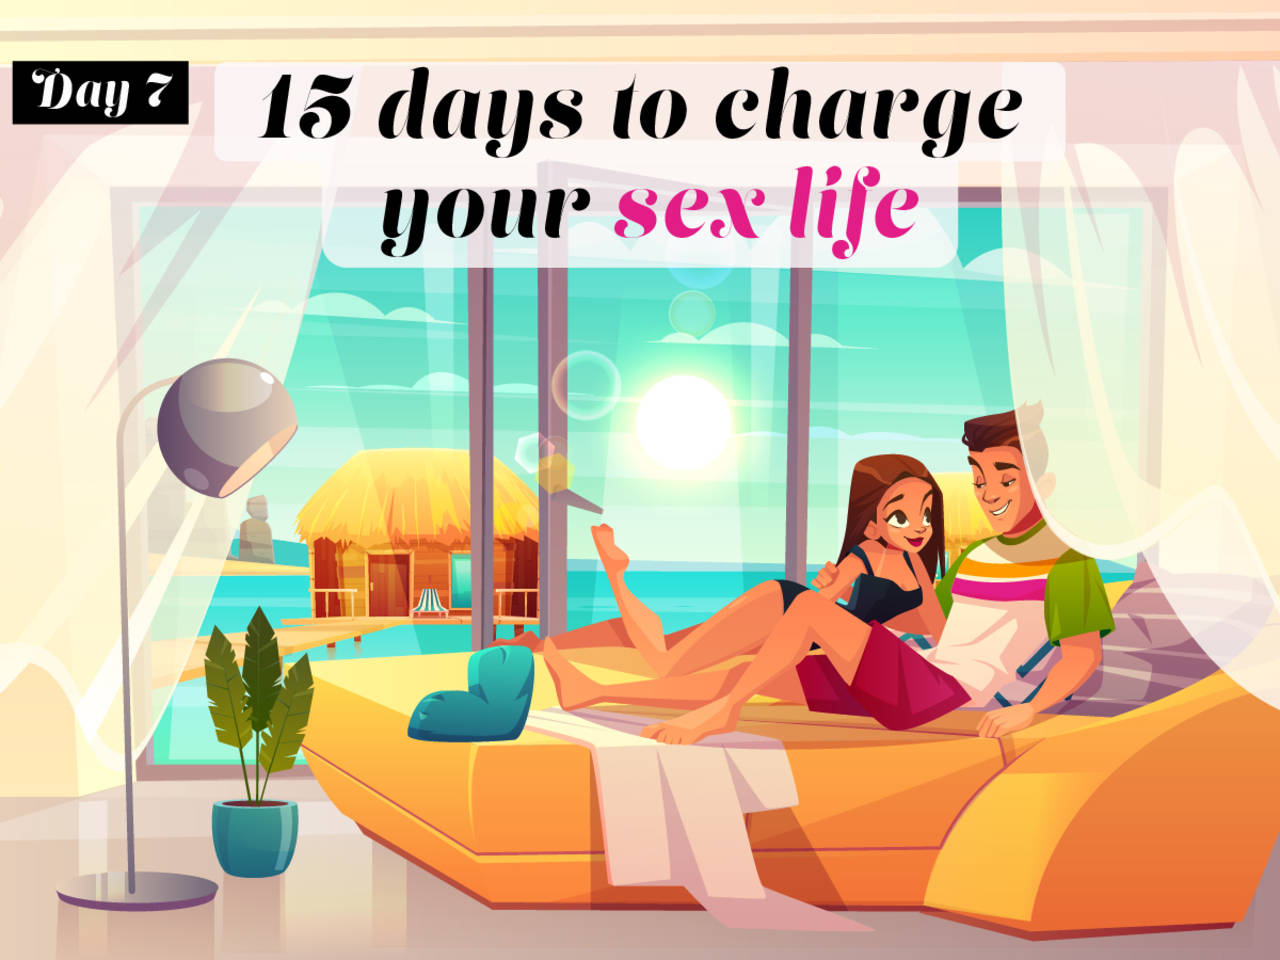 15 days to spice up your sex life in 2020 Blindfold and put on a little show (tip no image